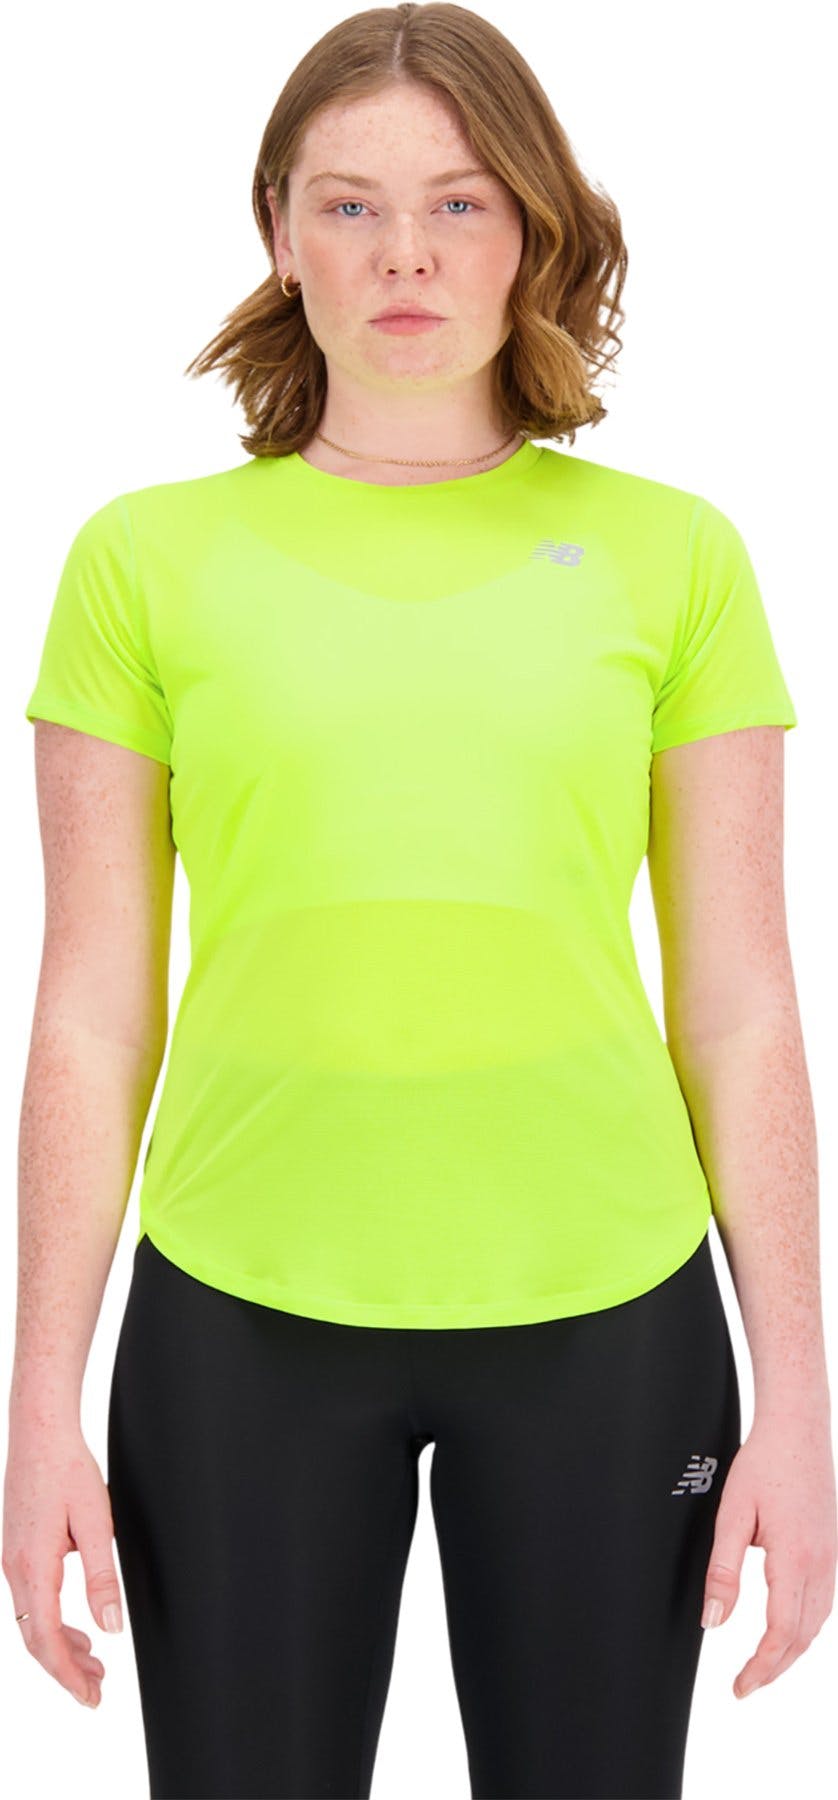 Product image for Accelerate Short Sleeve Top - Women's